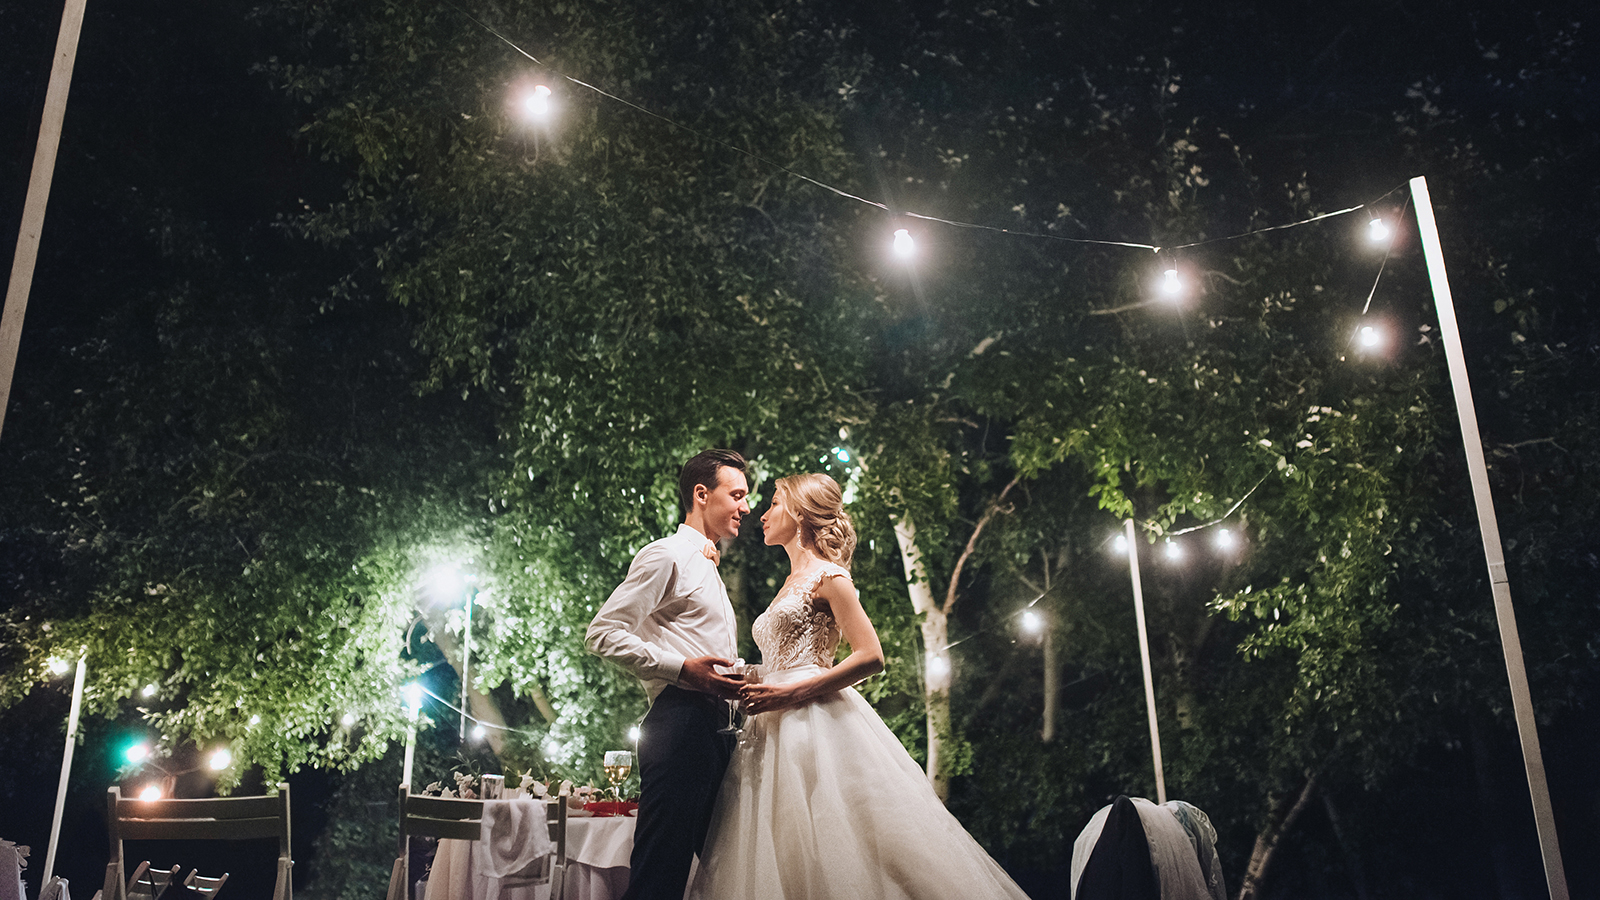 Beautiful newlyweds stand, holding hands, at a wedding party with lamps. Stylish wedding ceremony.